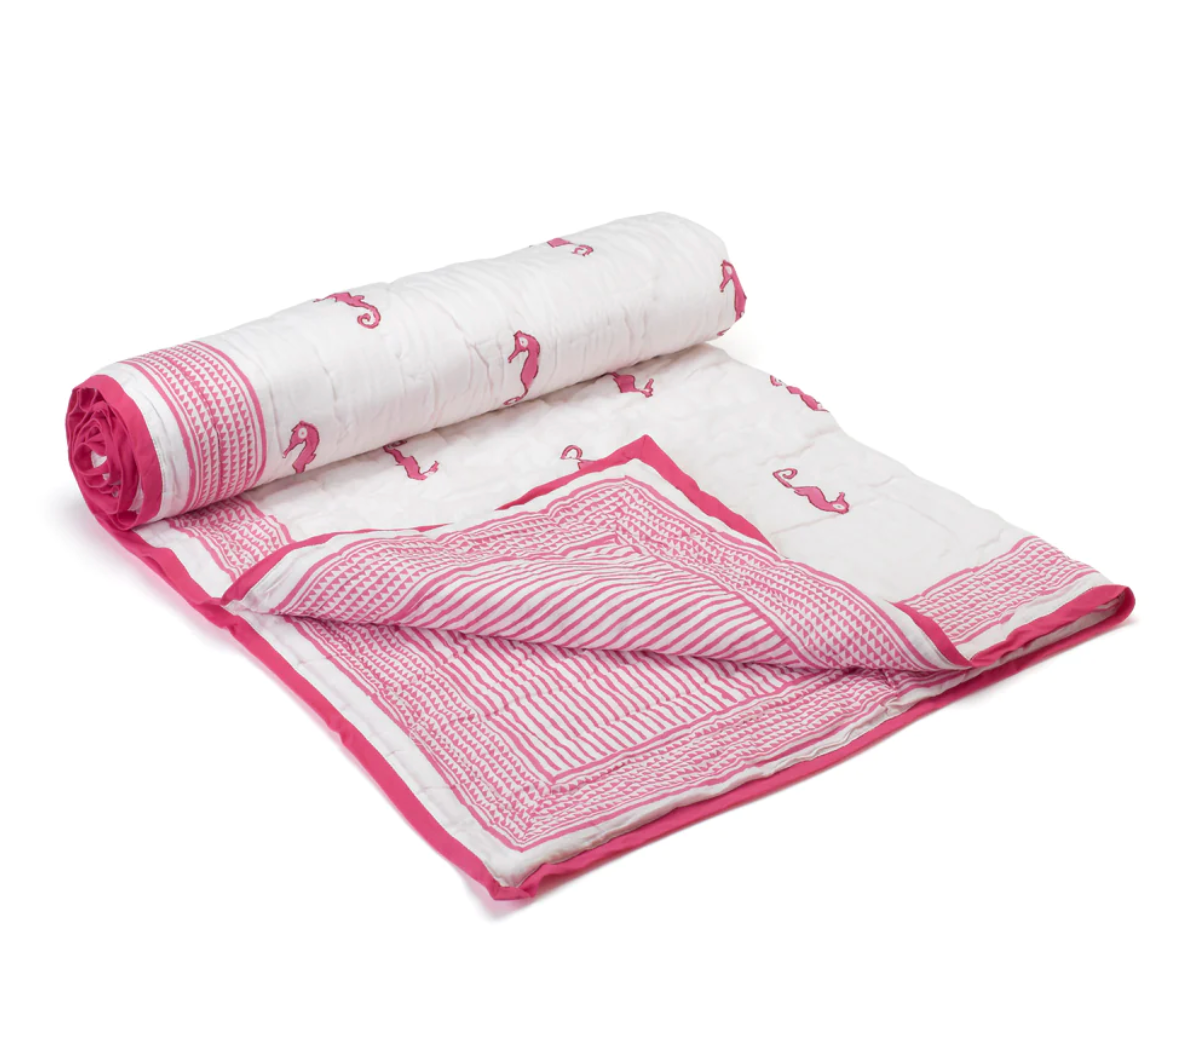 Sea Horse Quilted Blanket - Pink